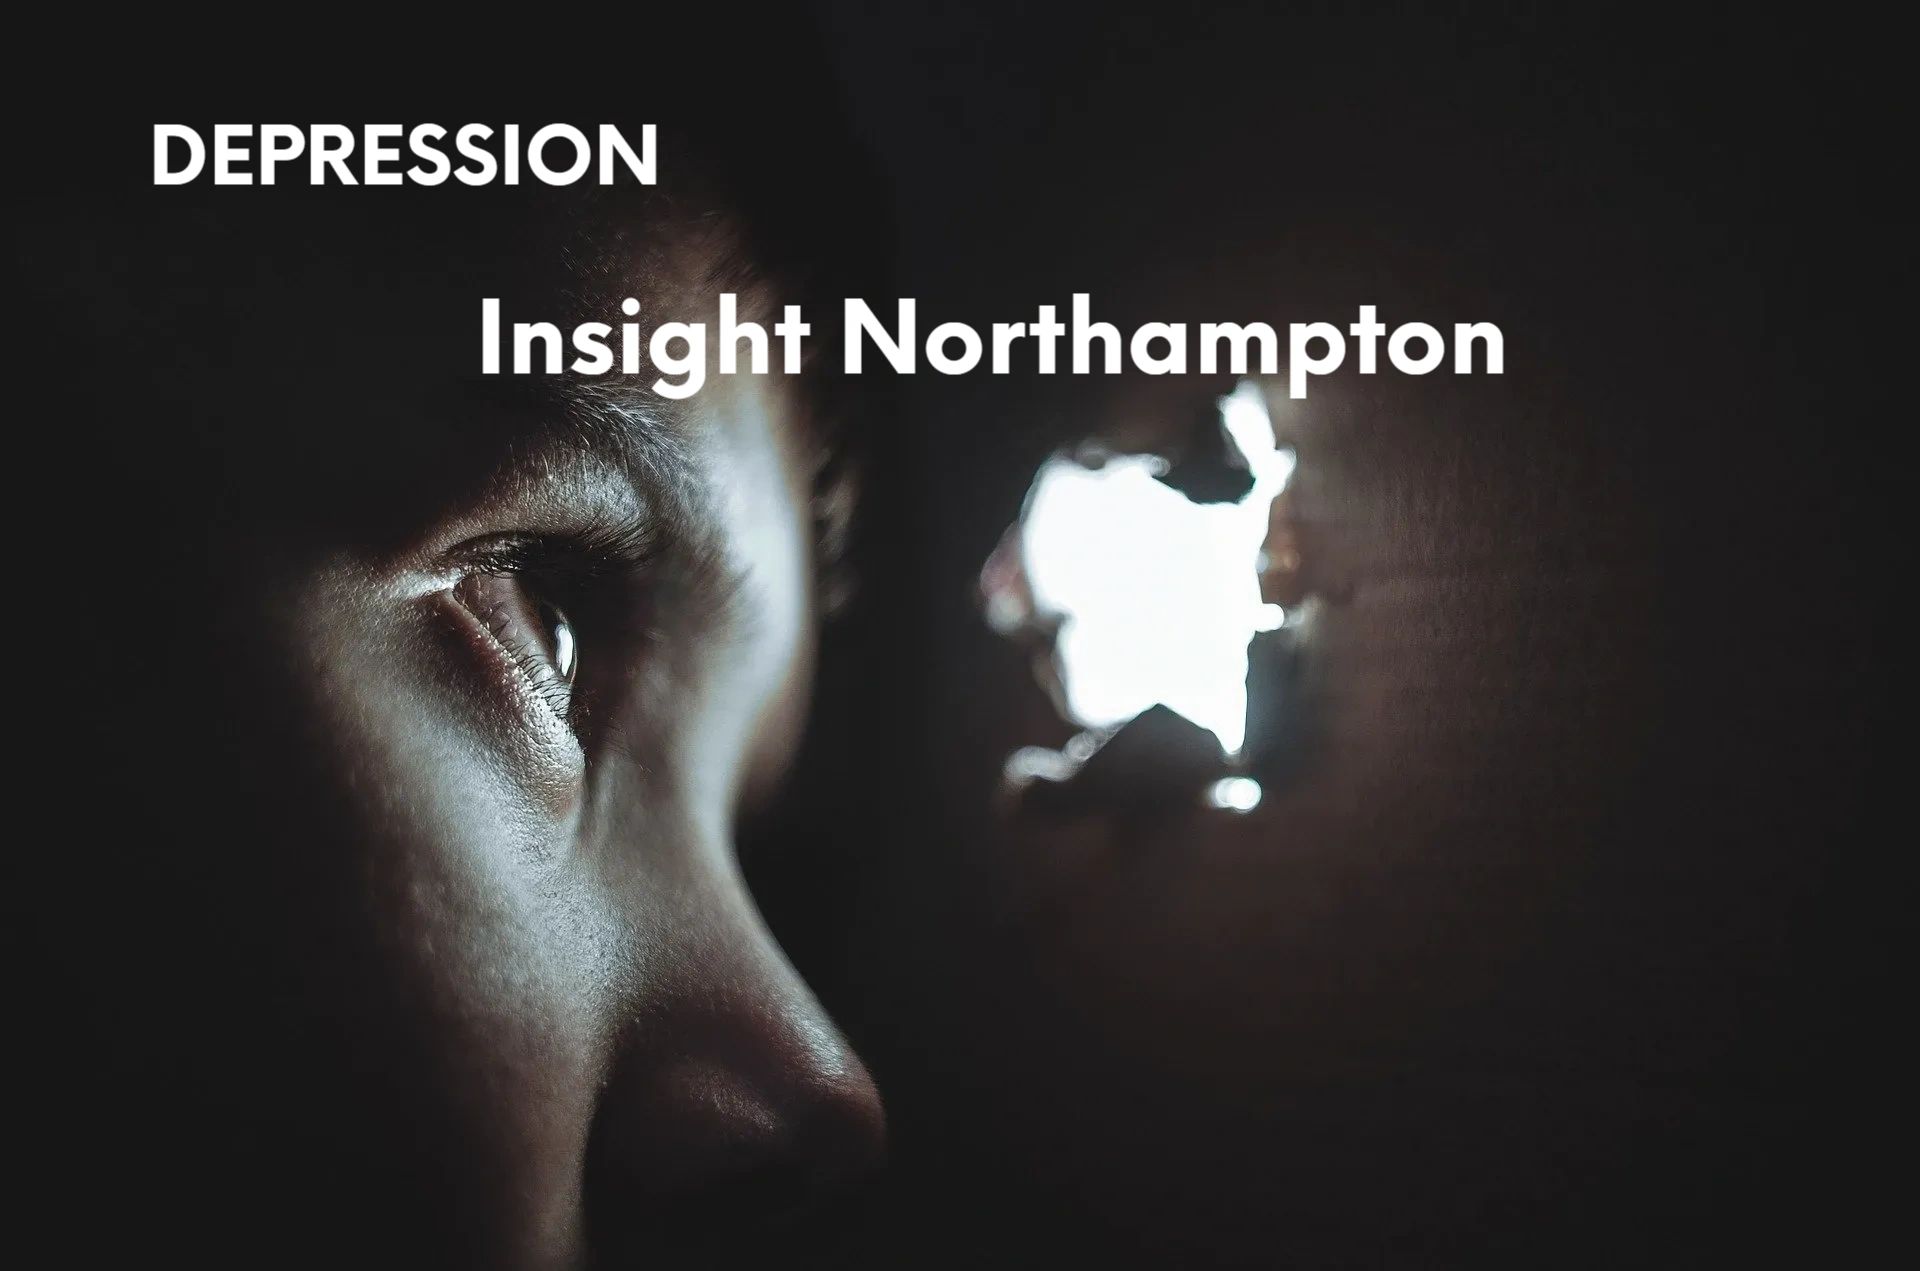 Insight Northampton can help with depression